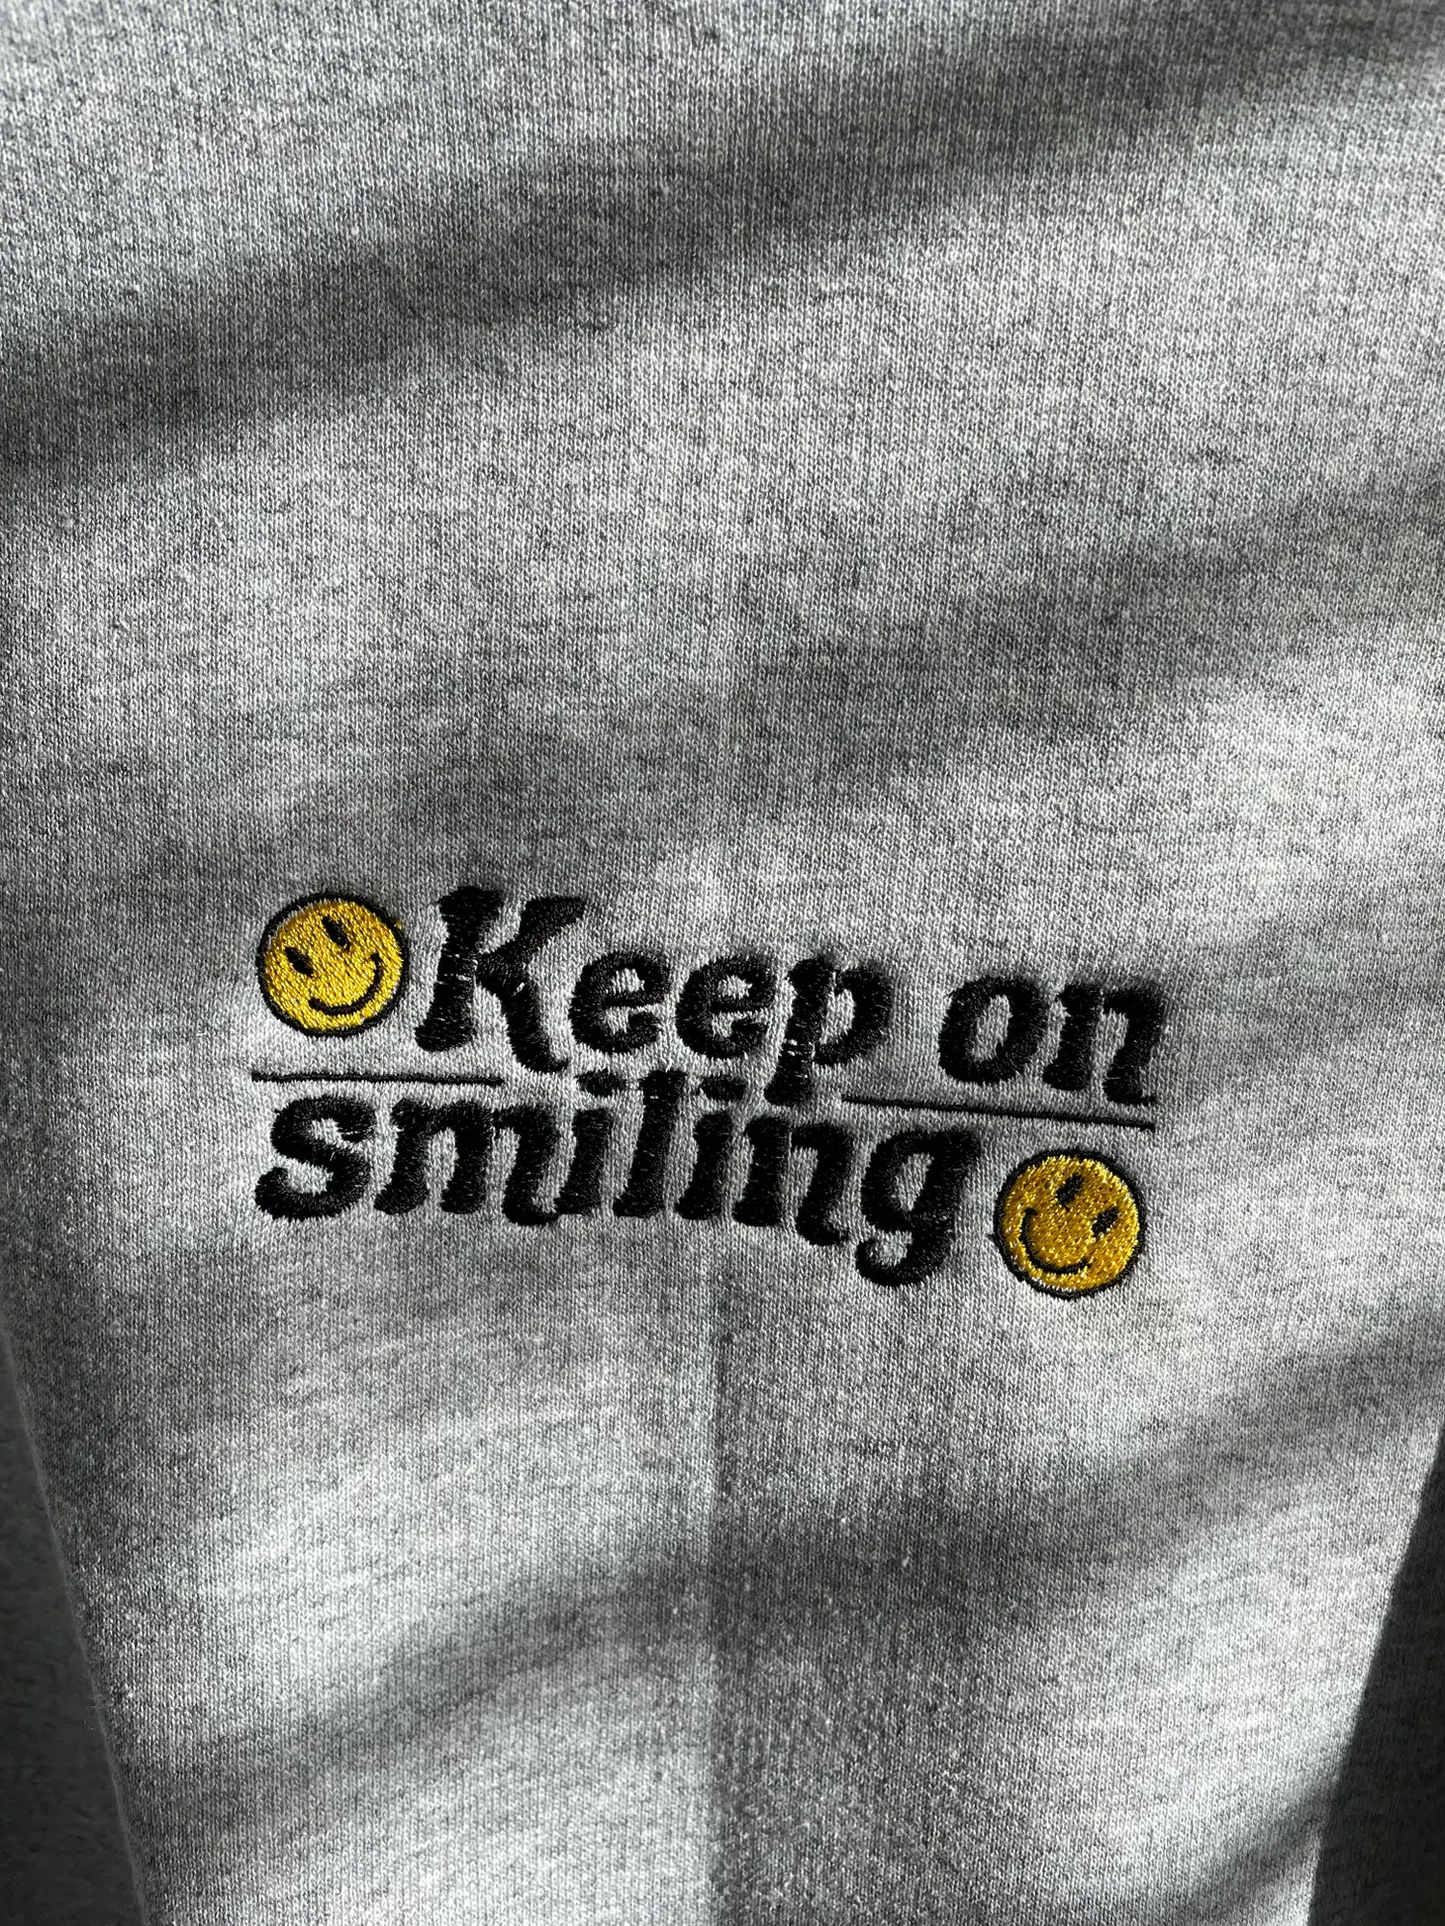 Keep On Smiling Crew- Olive Green